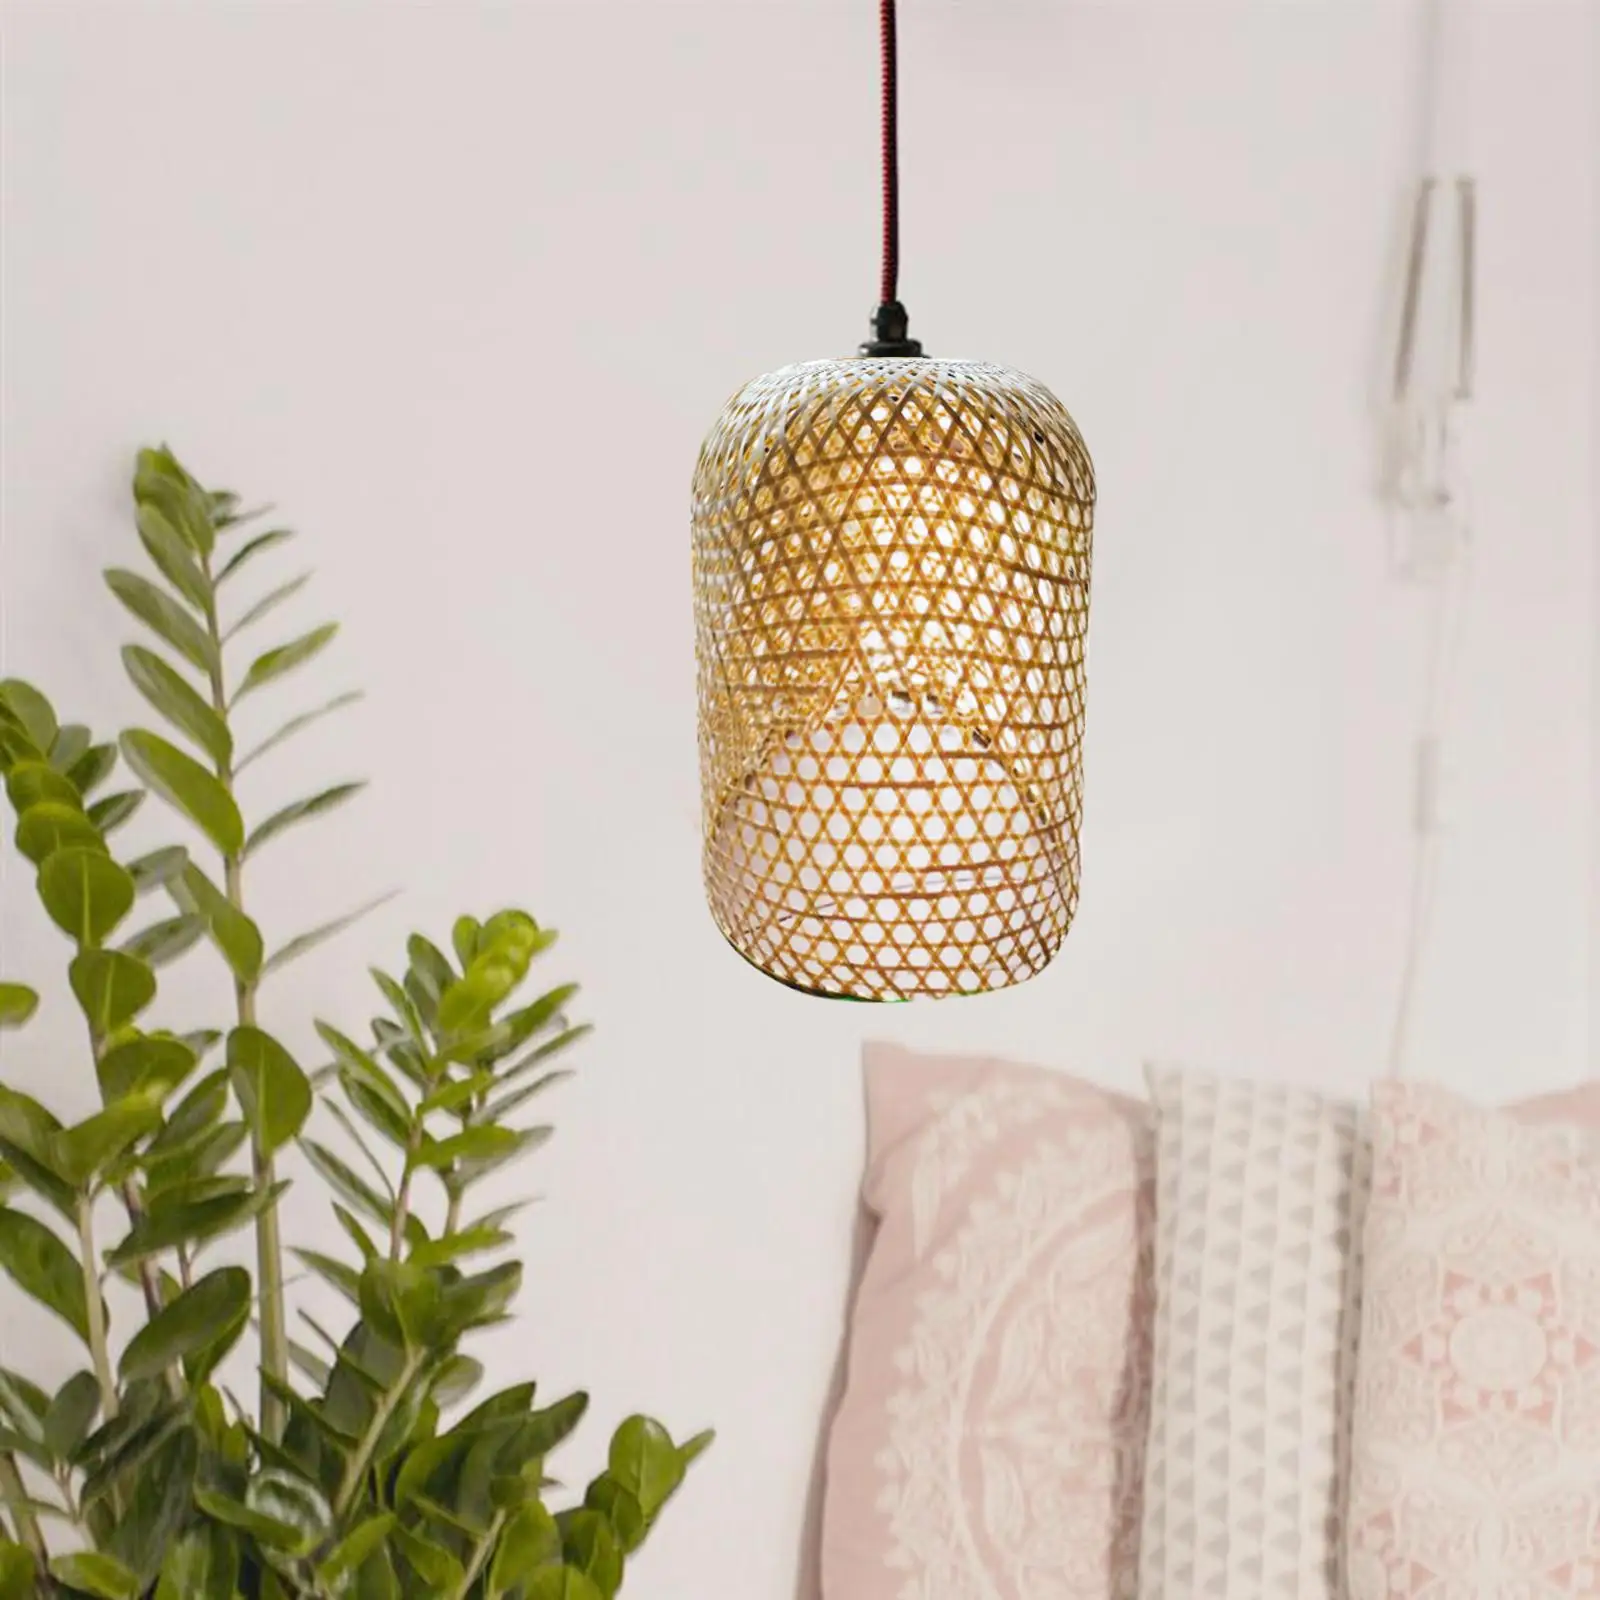 Handmade Weaving Lamp Shade Ornament Lampshade for Dining Room Hotel Kitchen Decor